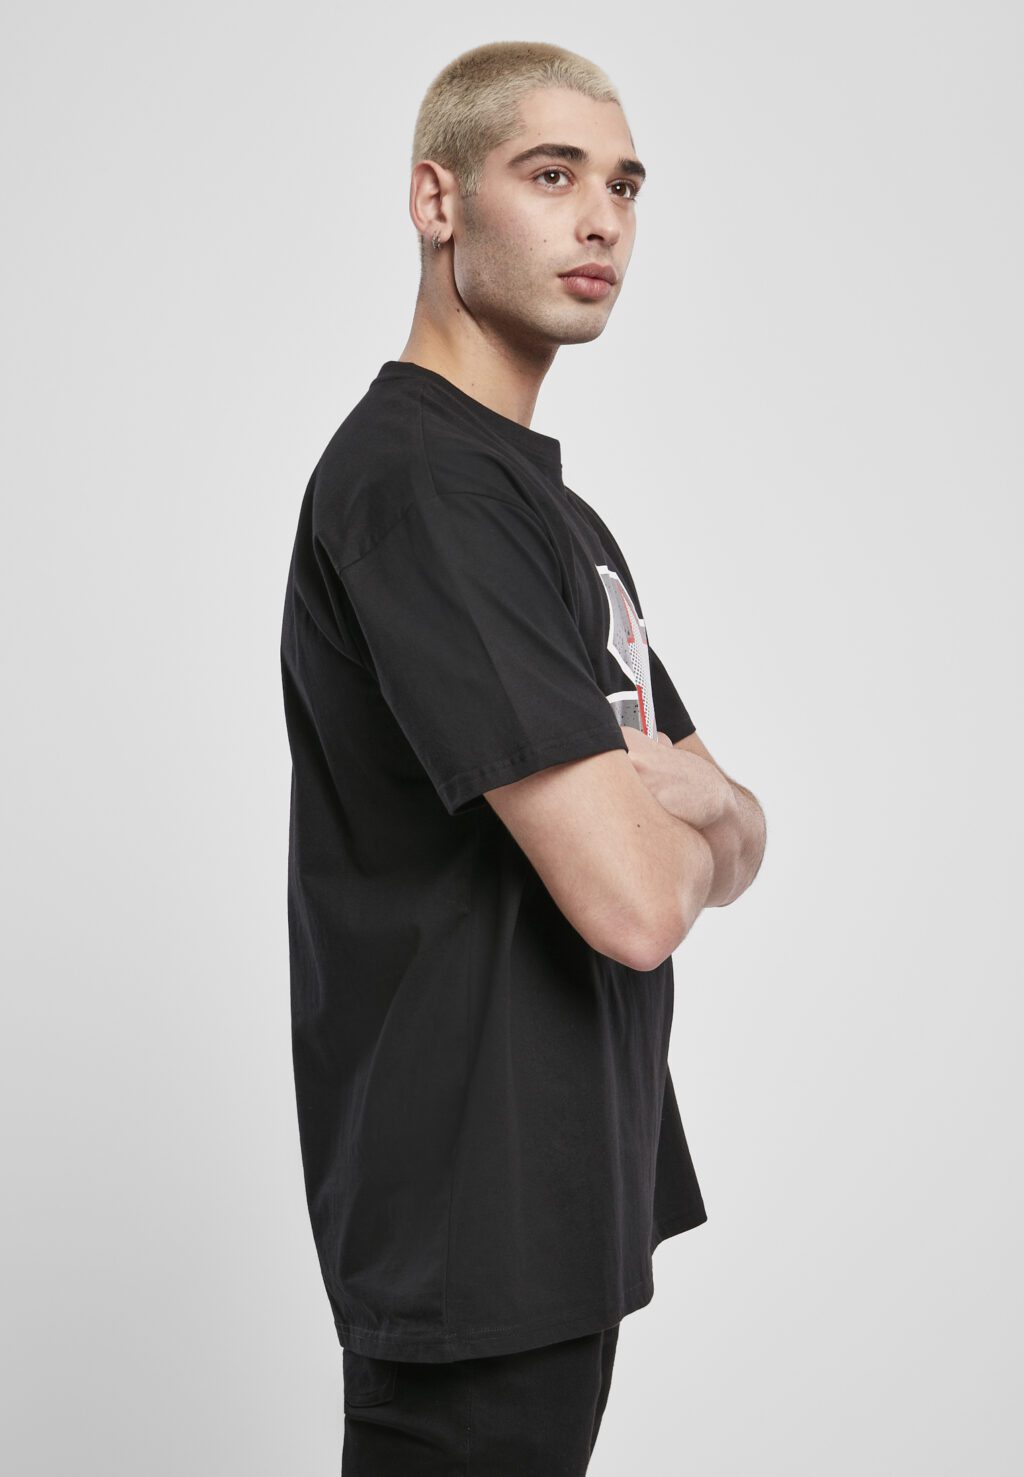 Starter Multicolored Logo Tee blk/gry ST017